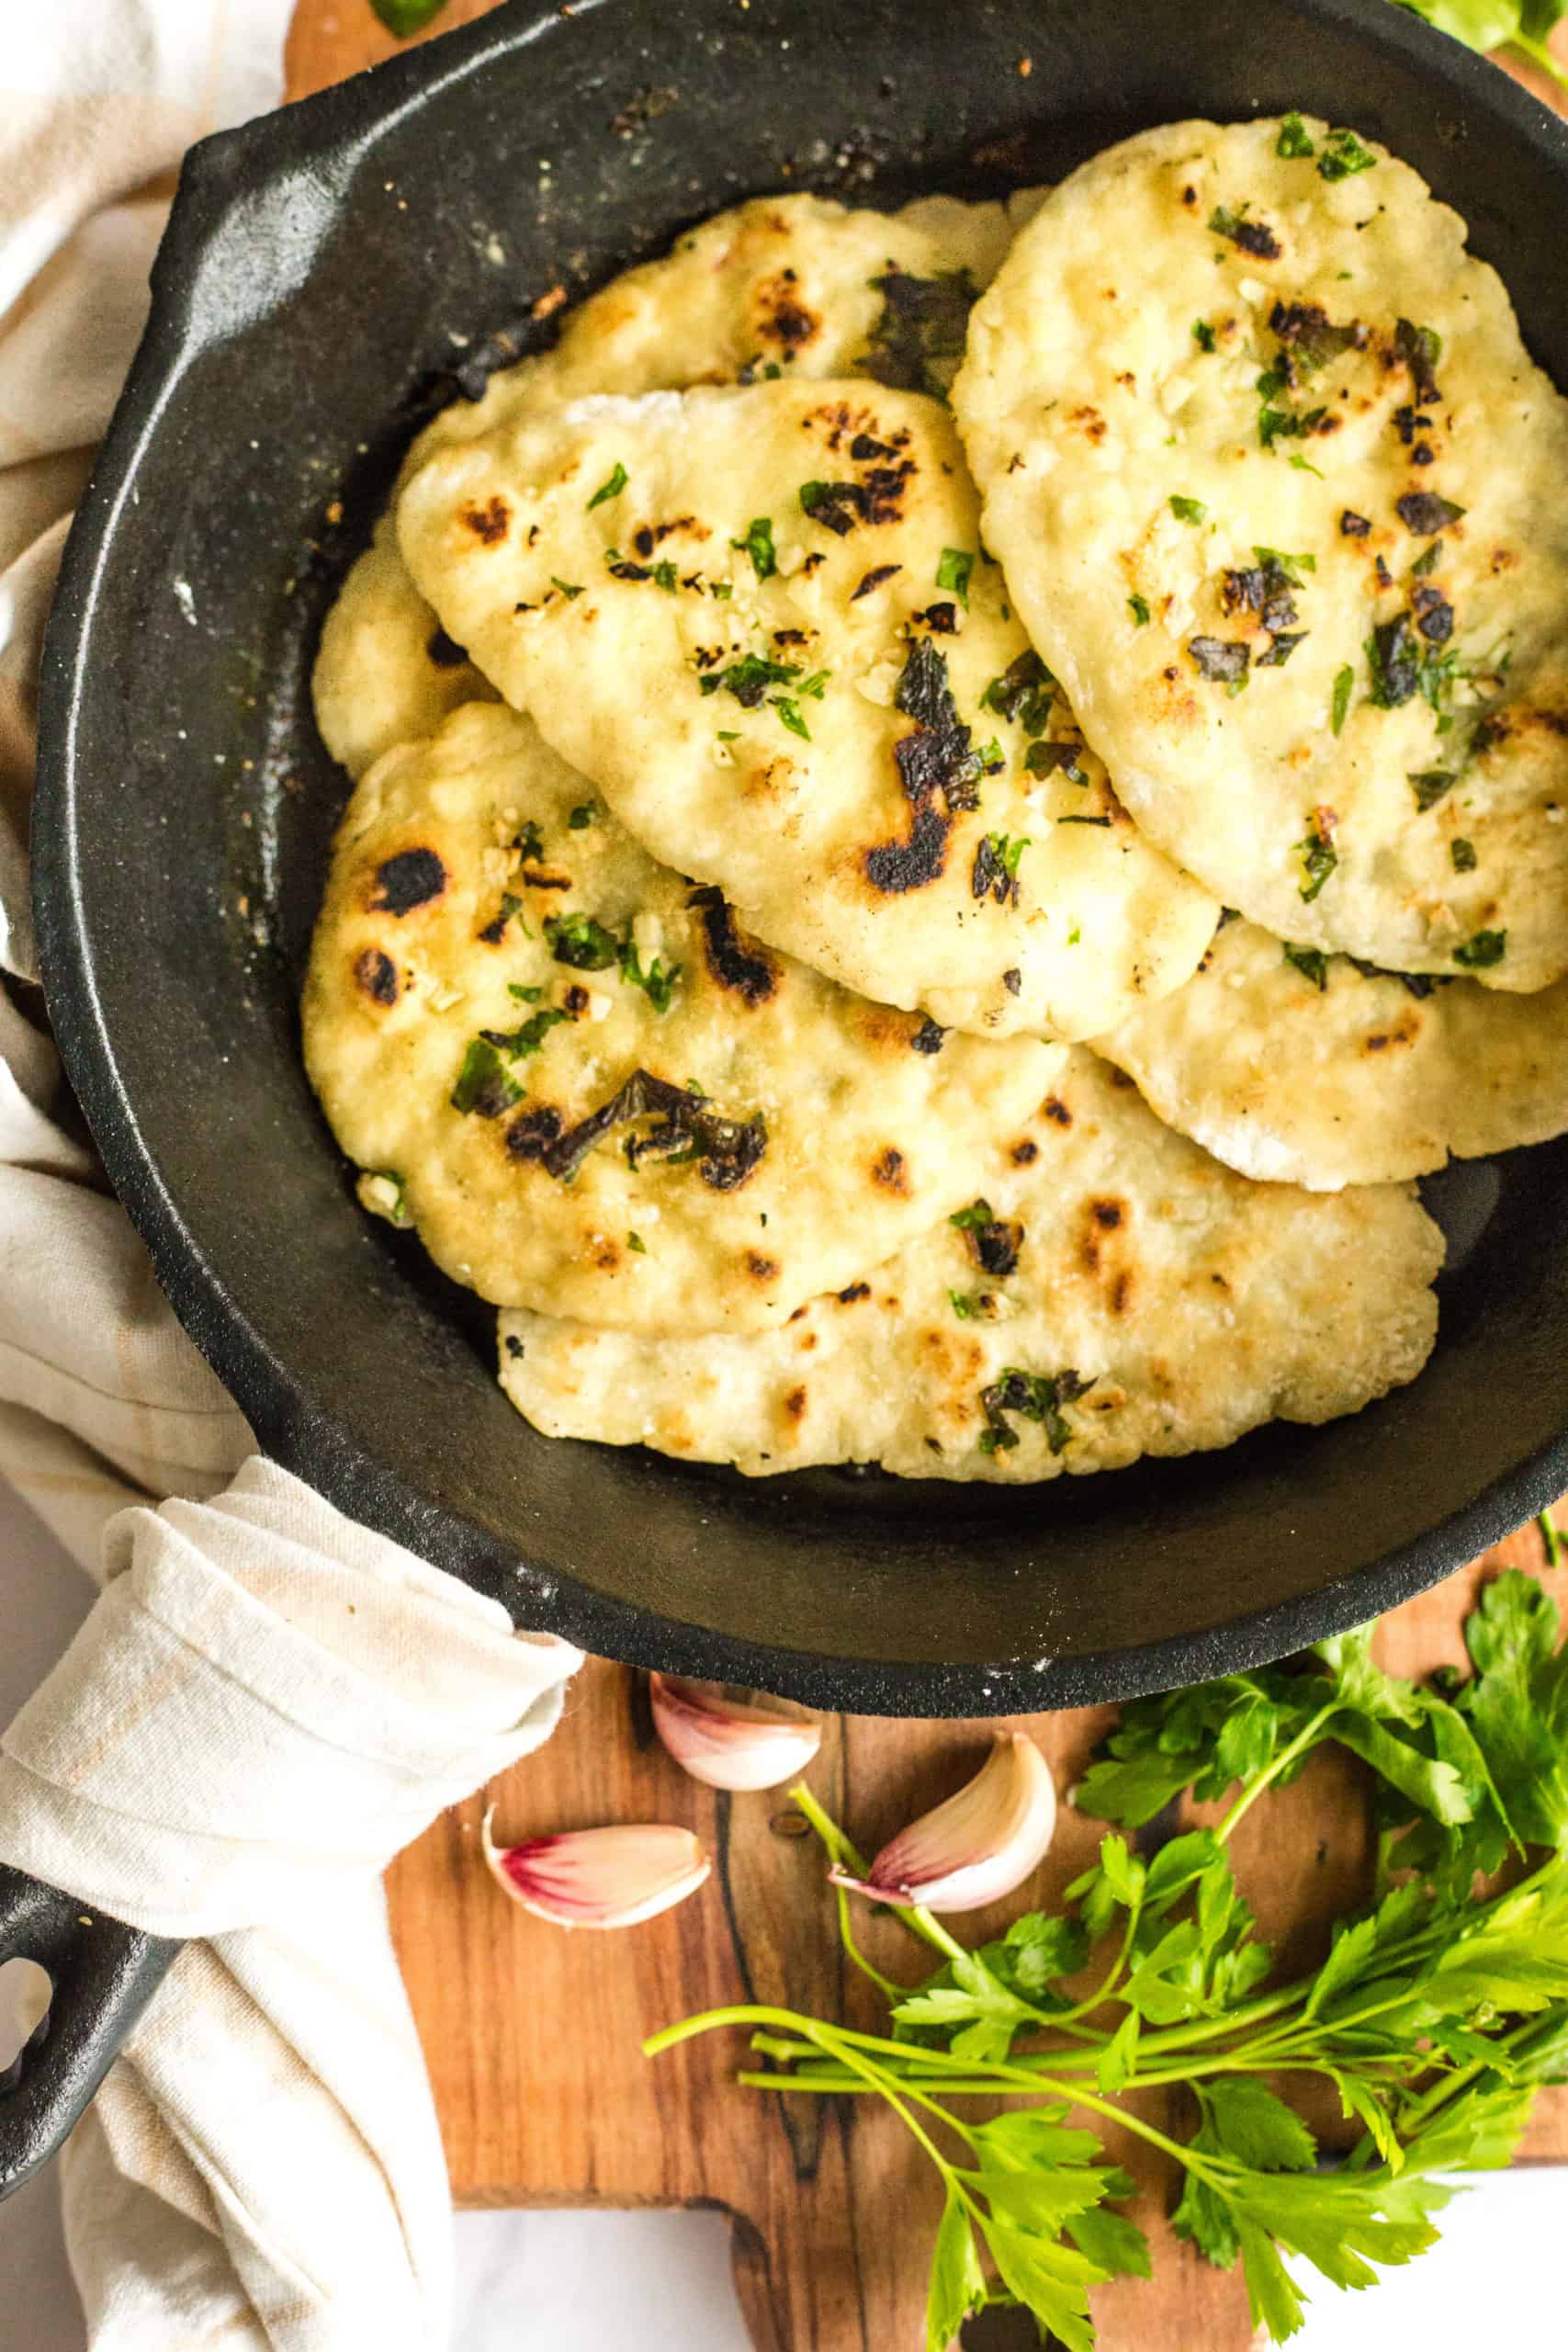 Gluten free naan bread in a cast iron skillet on a wooden board